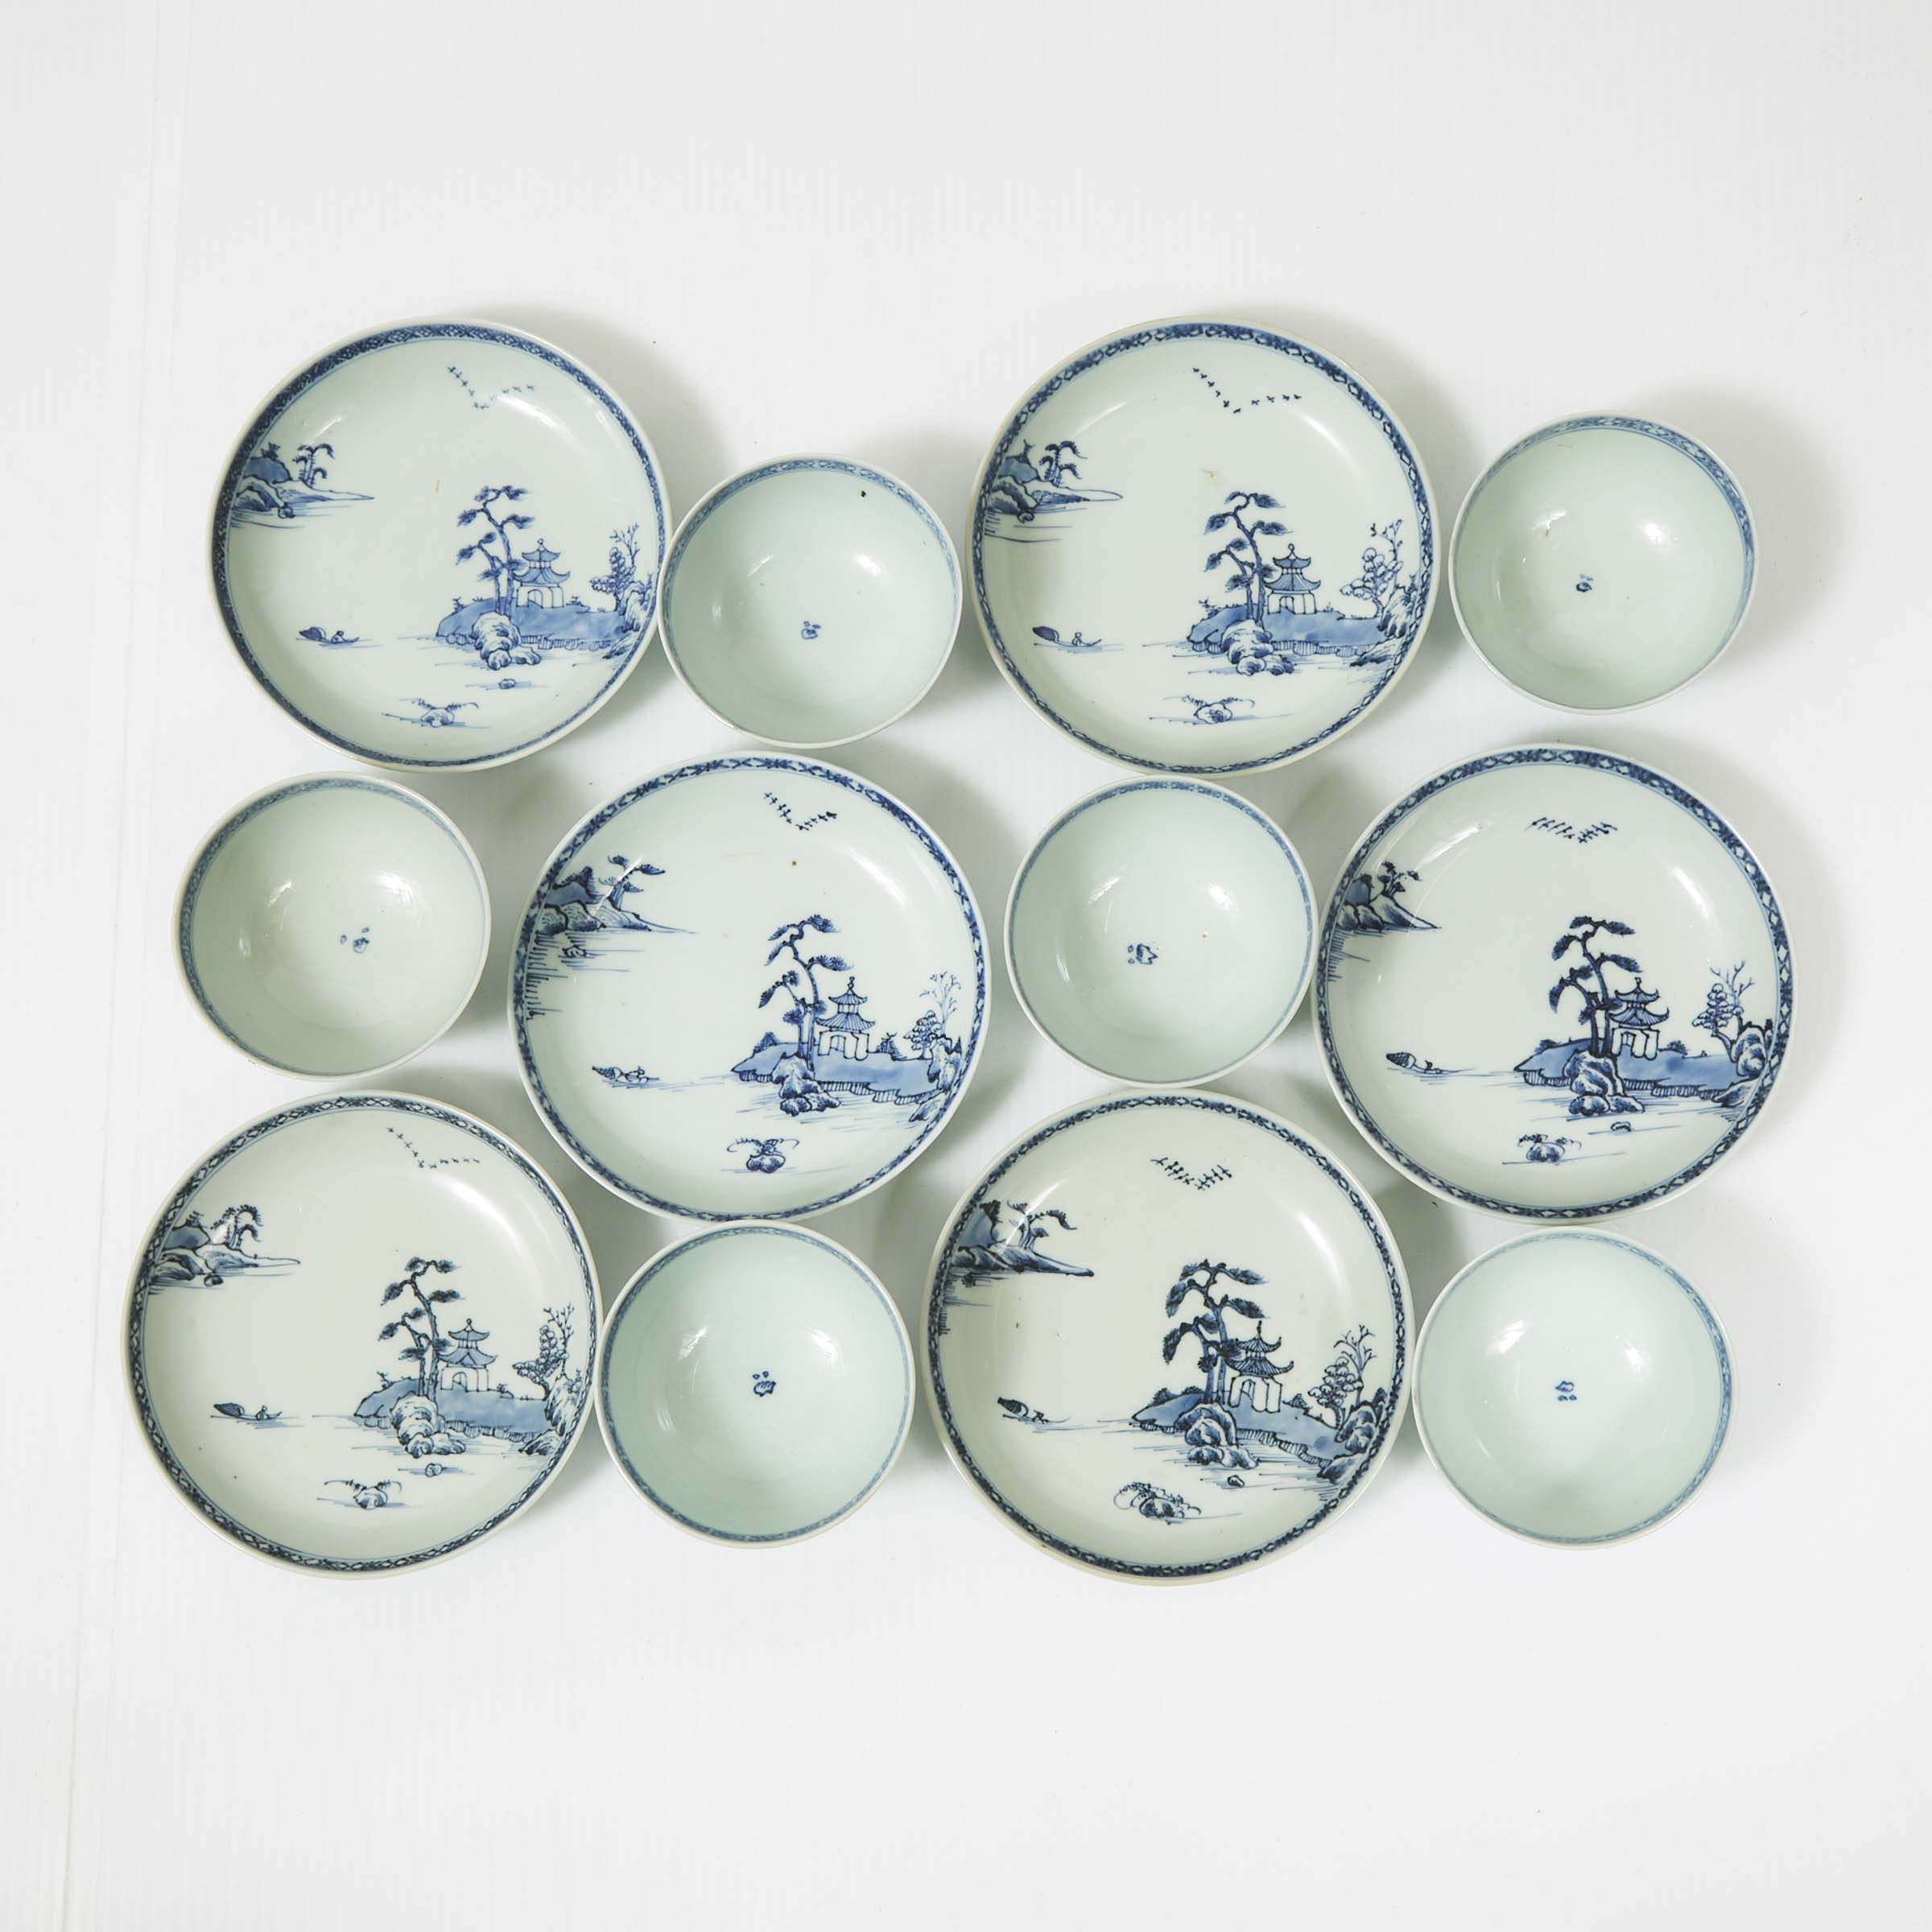 A Set of Twelve 'Flying Geese' Pattern Bowls and Saucer Dishes from the Nanking Cargo, Qianlong Period, Circa 1750